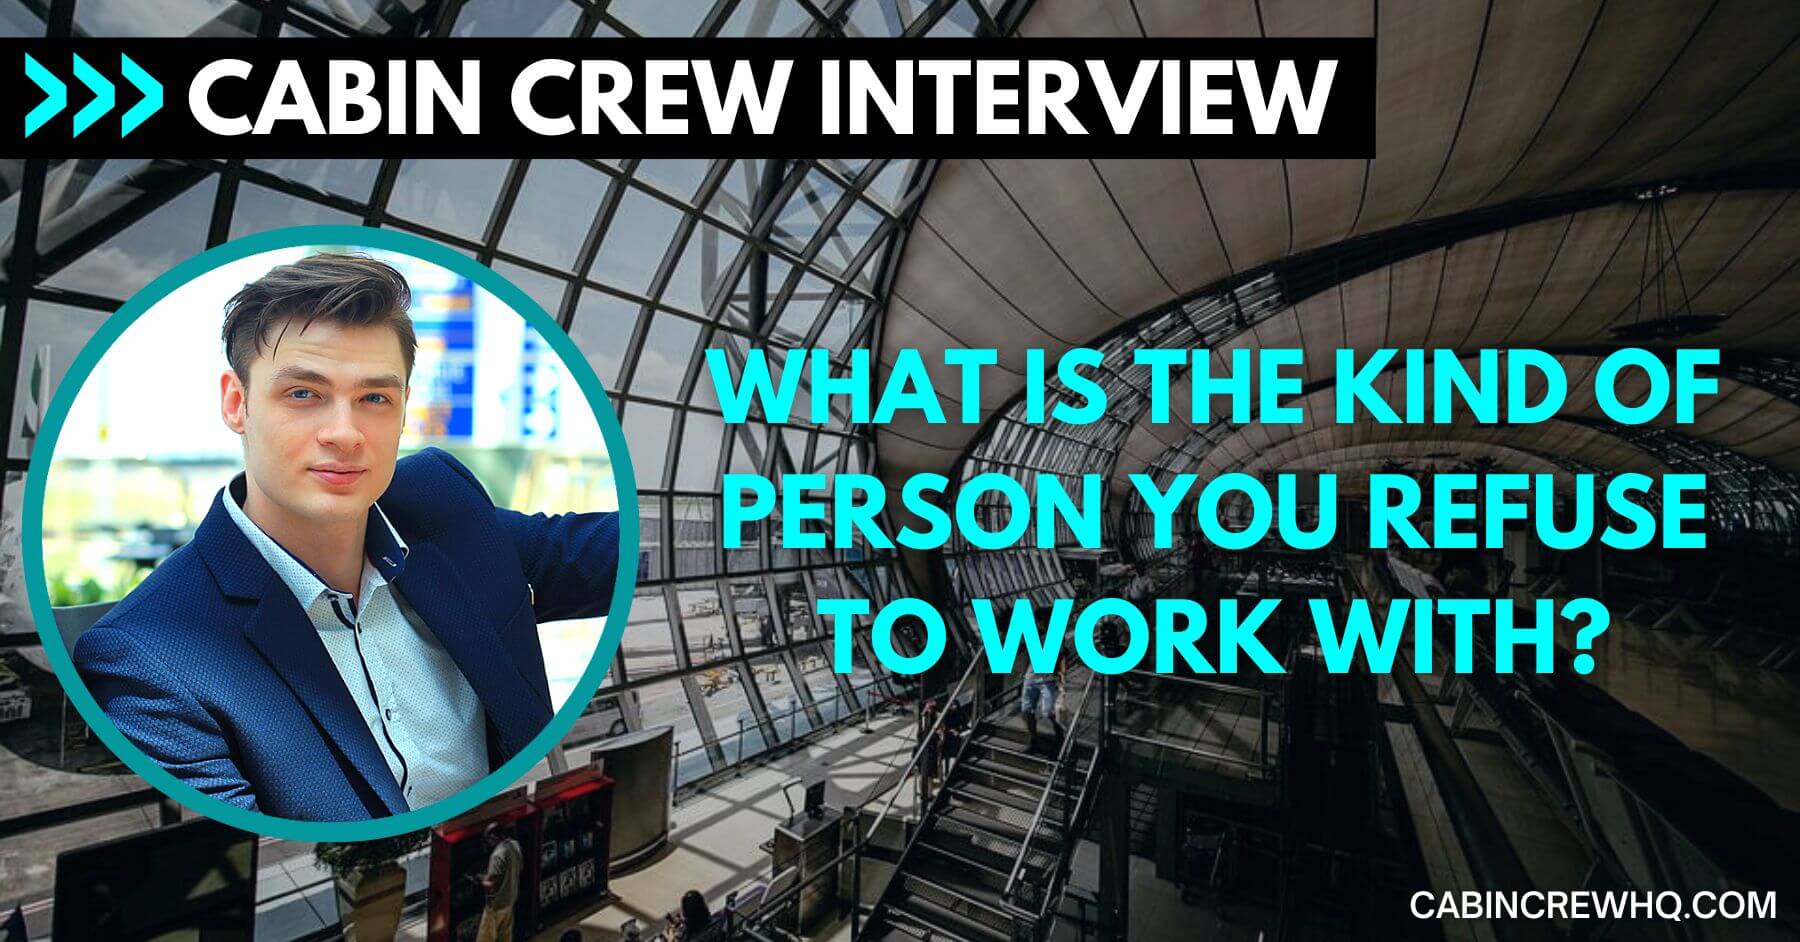 how to answer What is the kind of person you refuse to work with